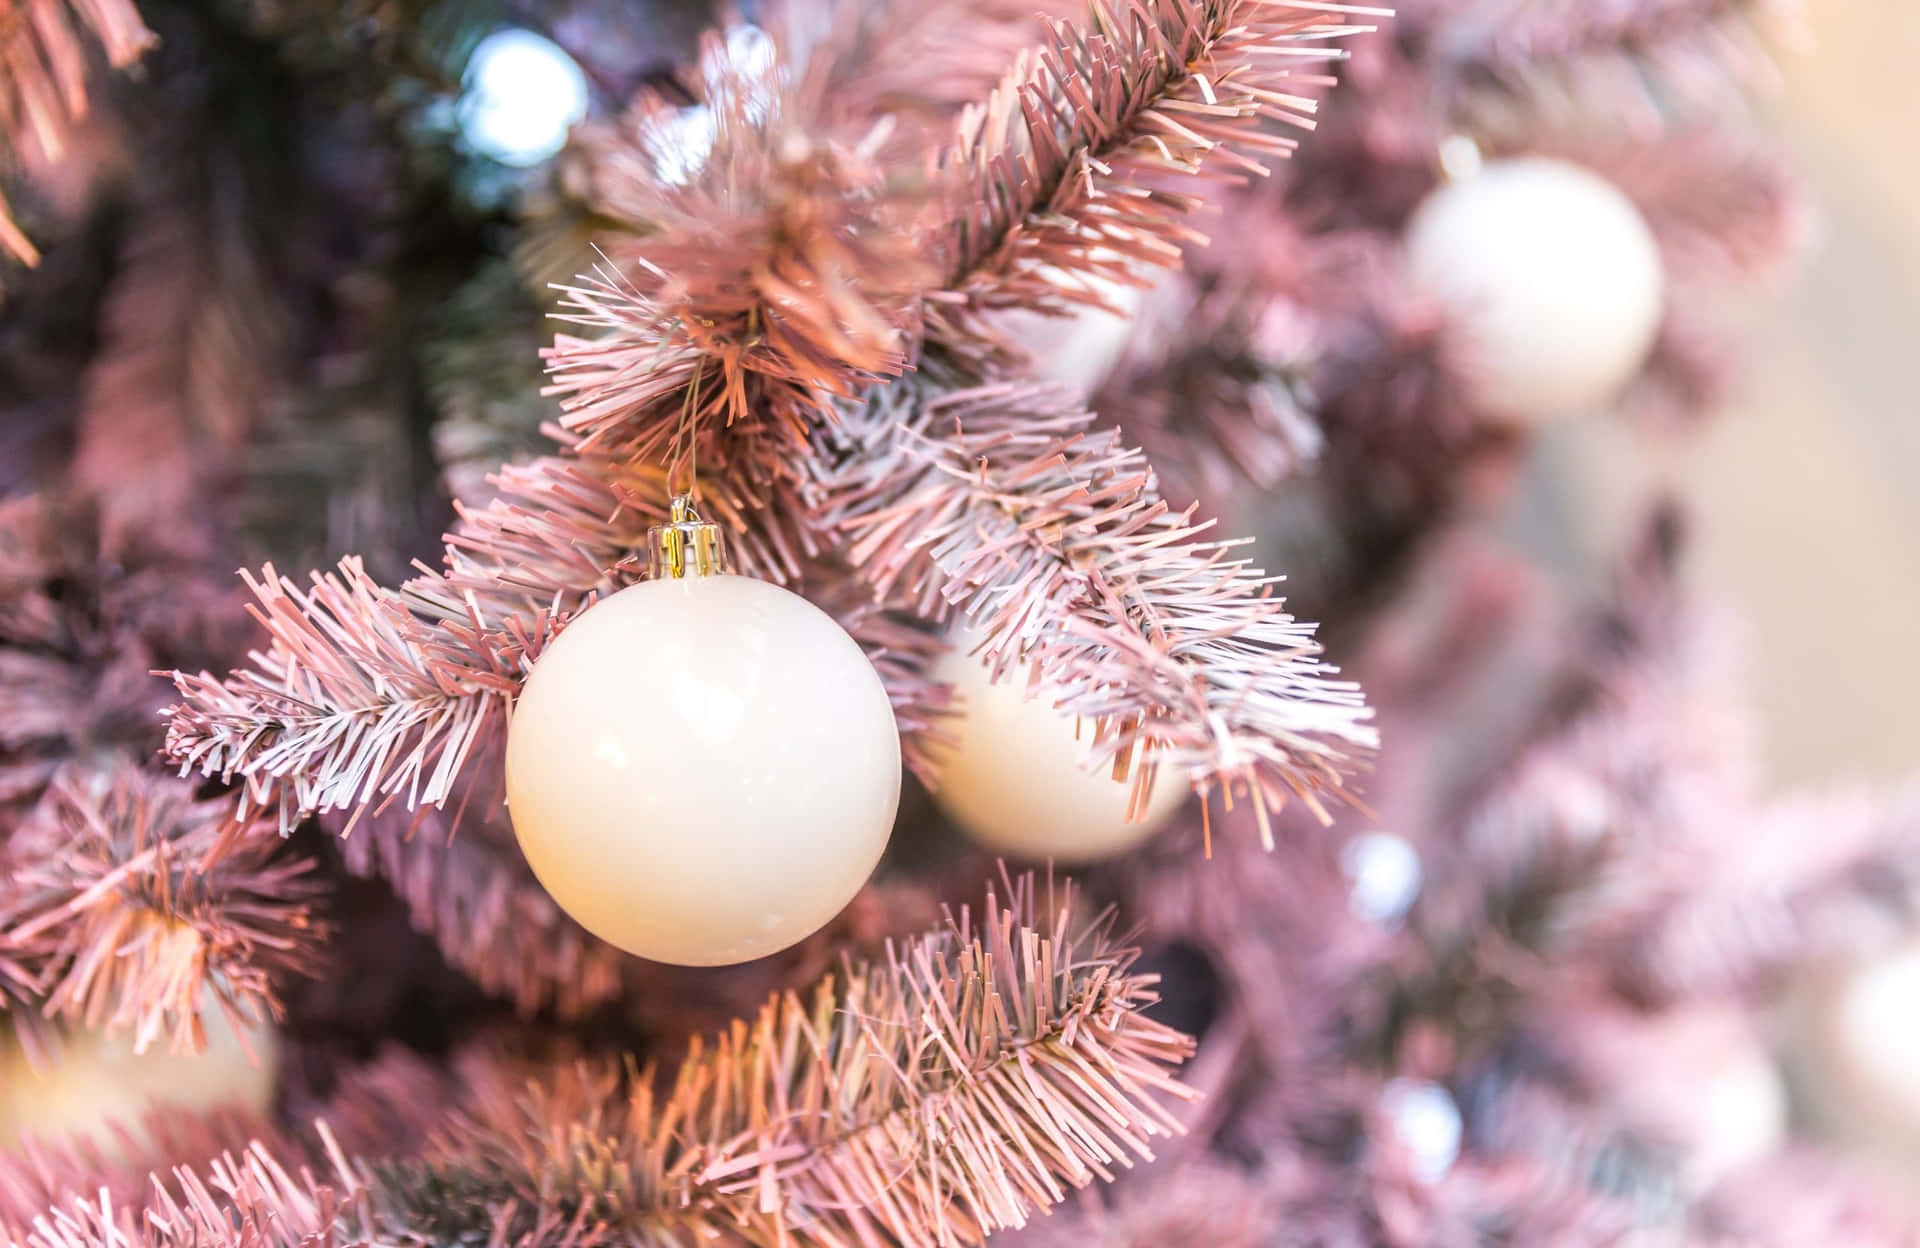 A Pink Christmas Tree With White Balls On It